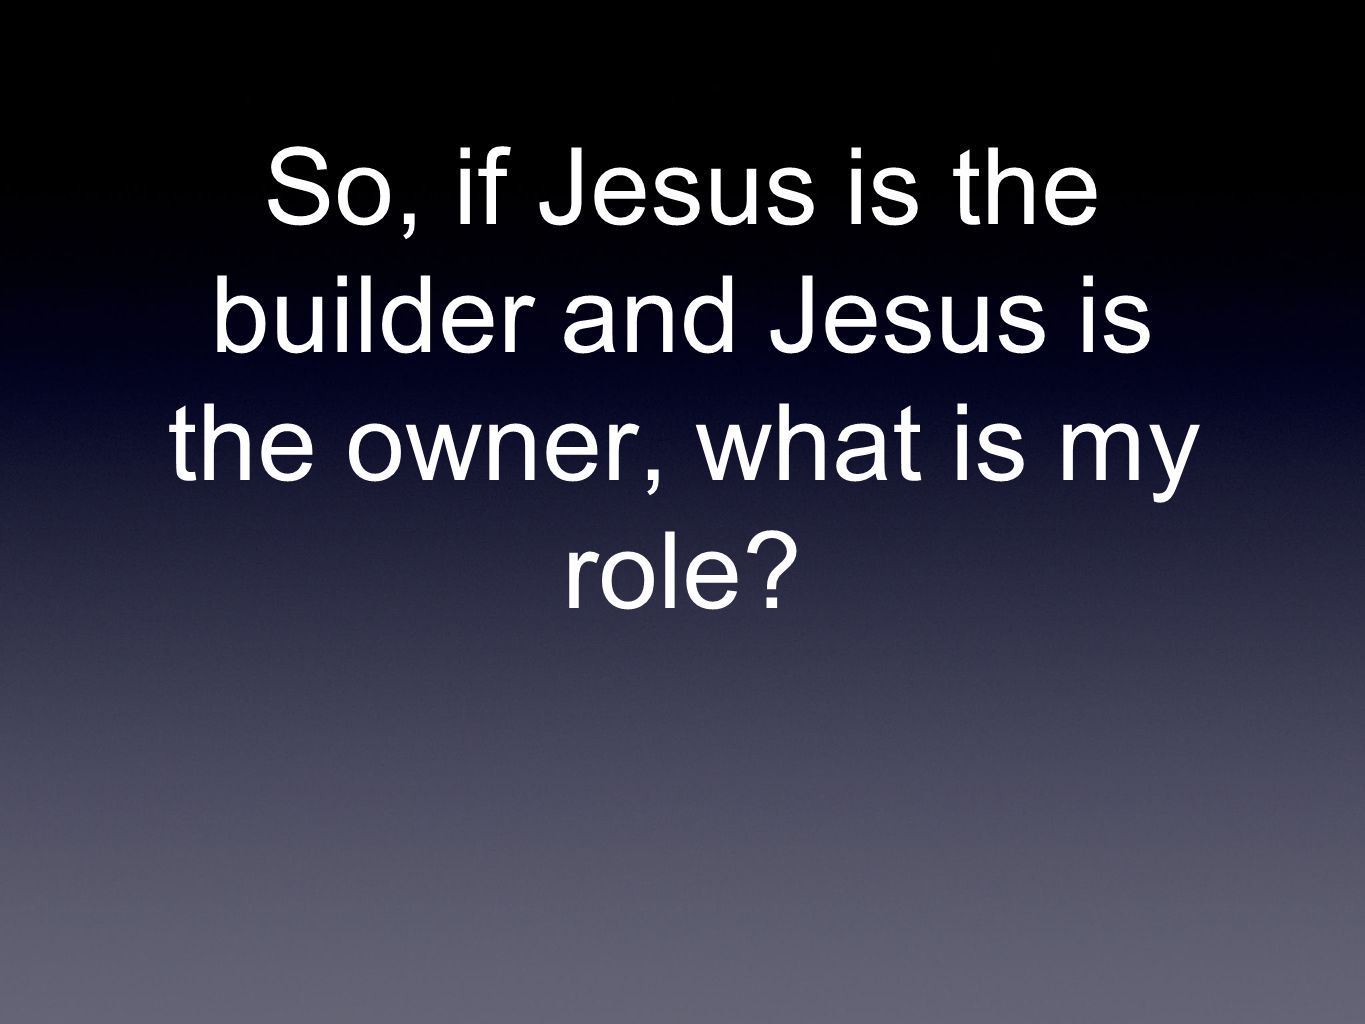 So, if Jesus is the builder and Jesus is the owner, what is my role